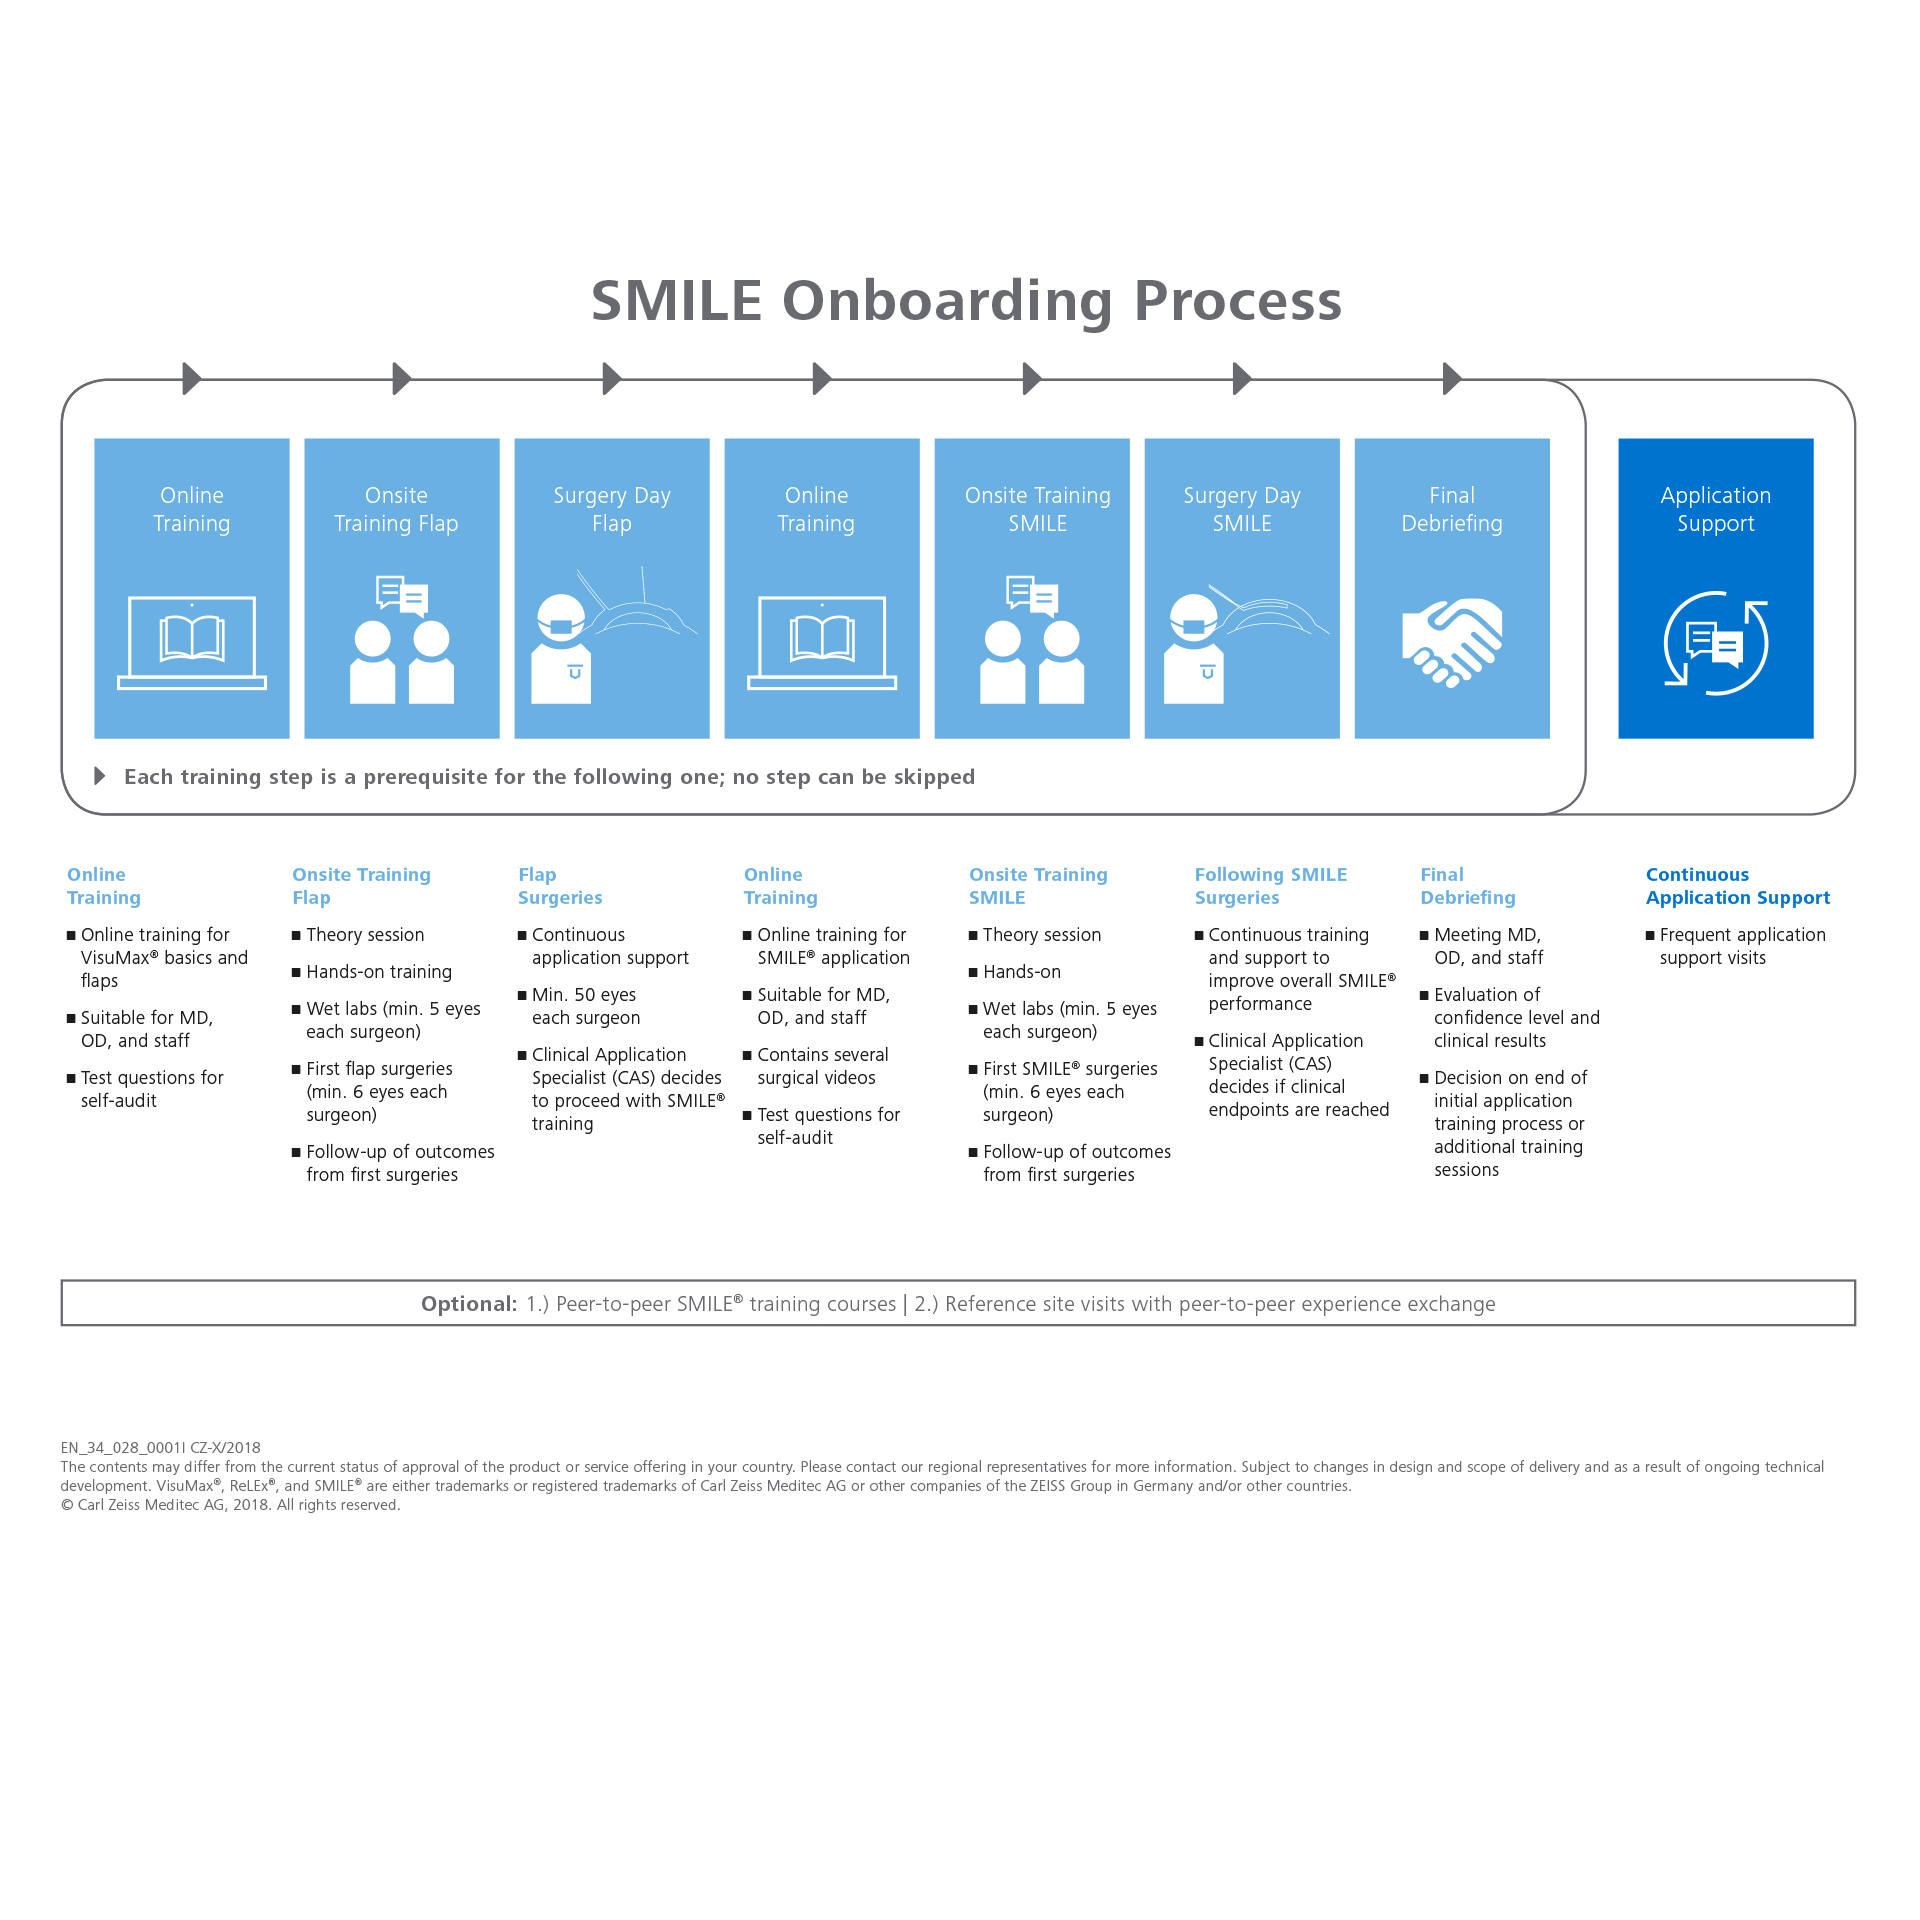 SMILE onboarding process